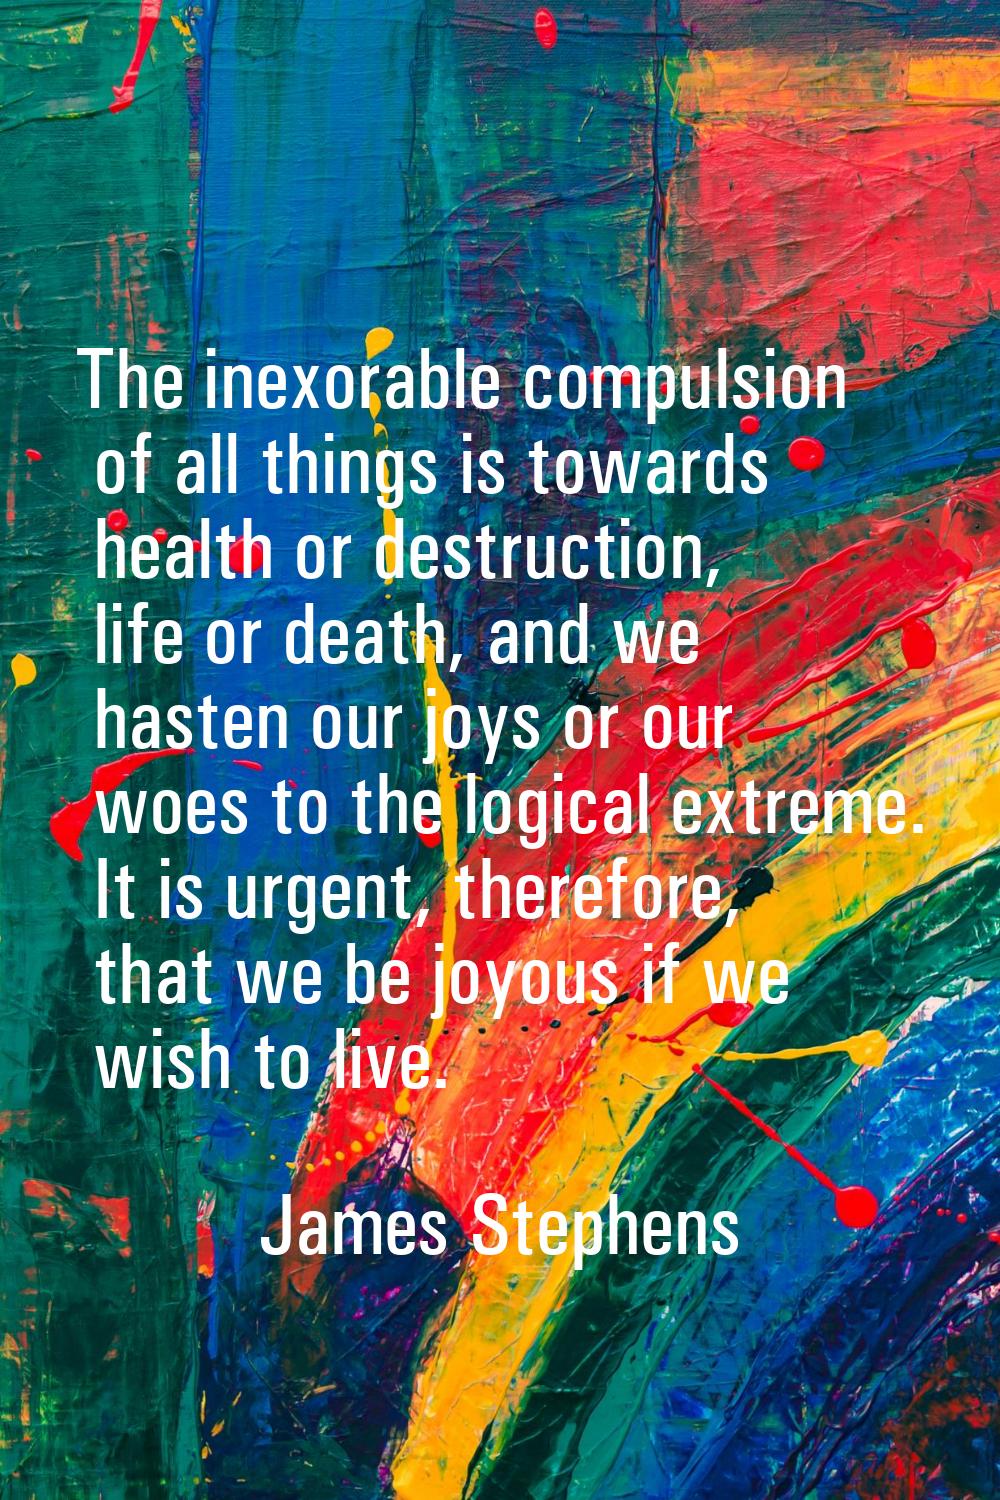 The inexorable compulsion of all things is towards health or destruction, life or death, and we has